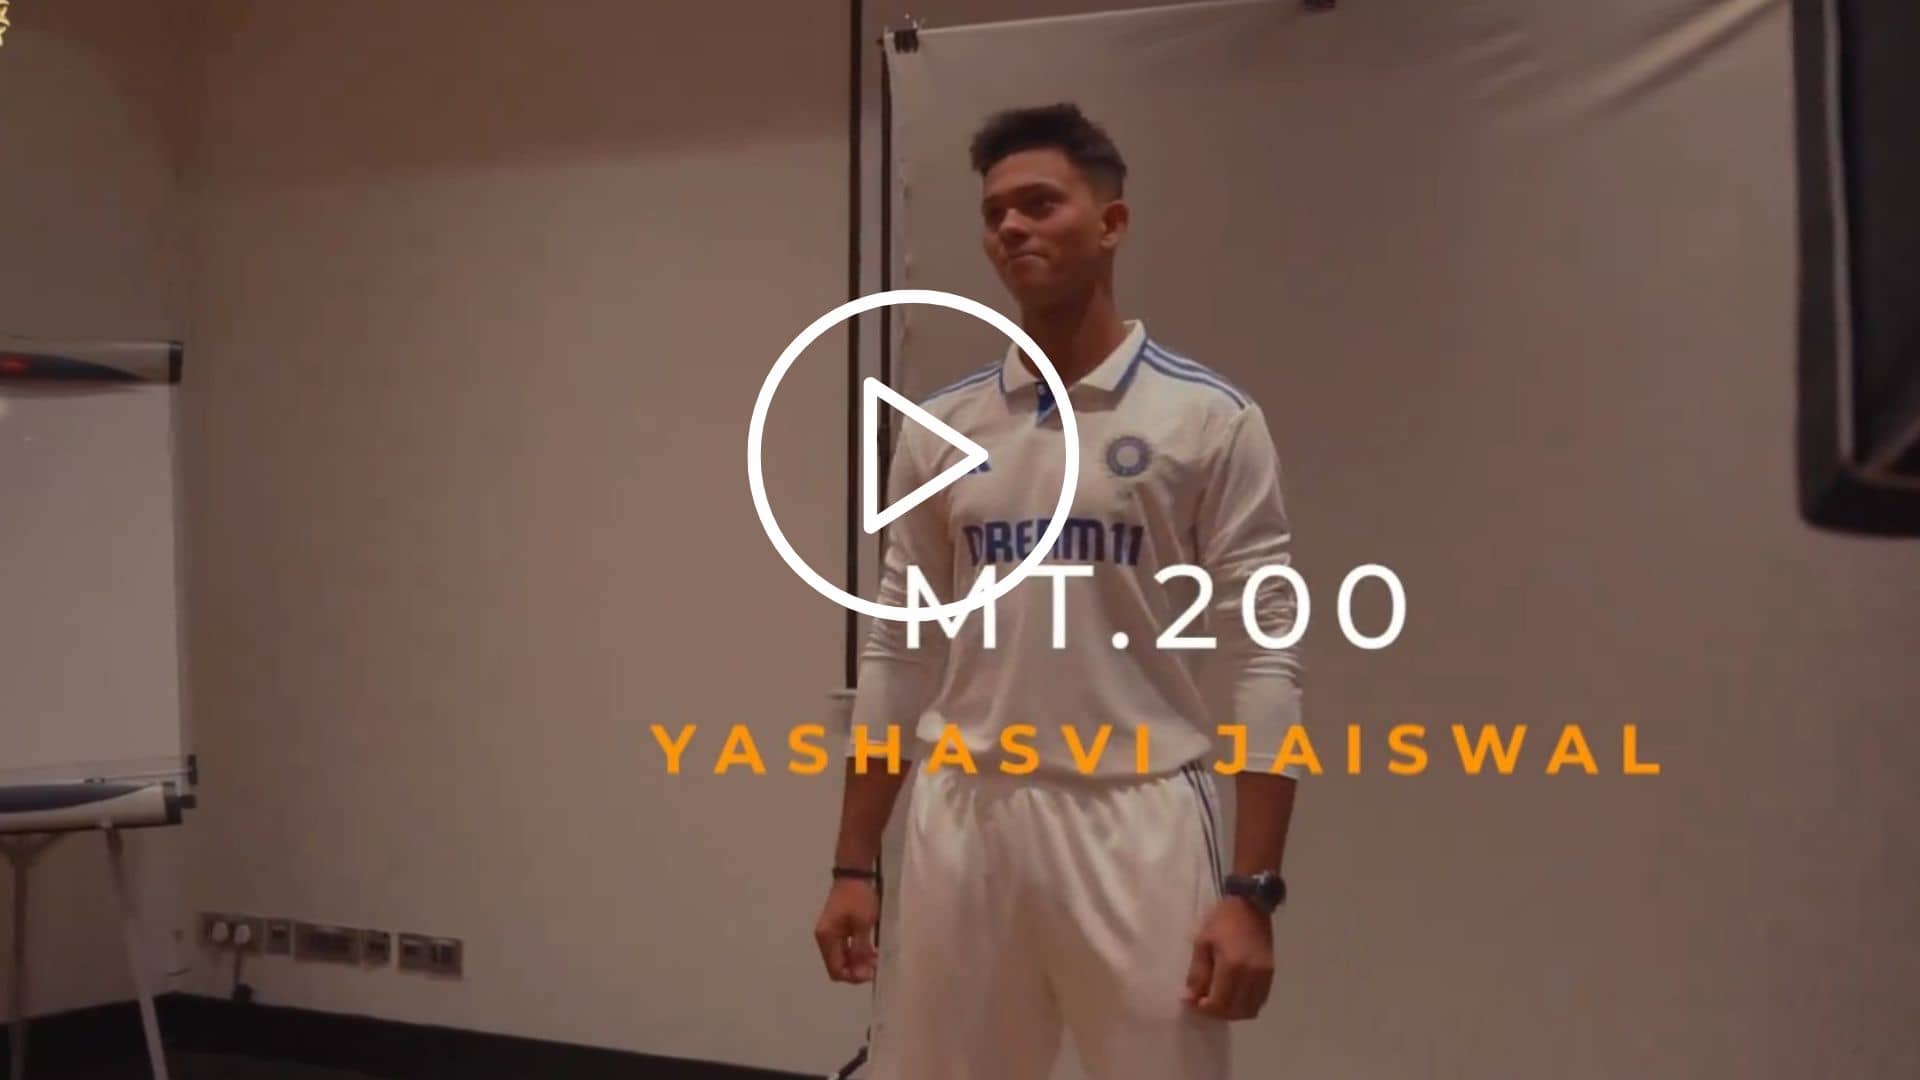 [Watch] Yashasvi Jaiswal's First Reaction After Spectacular Double Century That Sparked Vizag